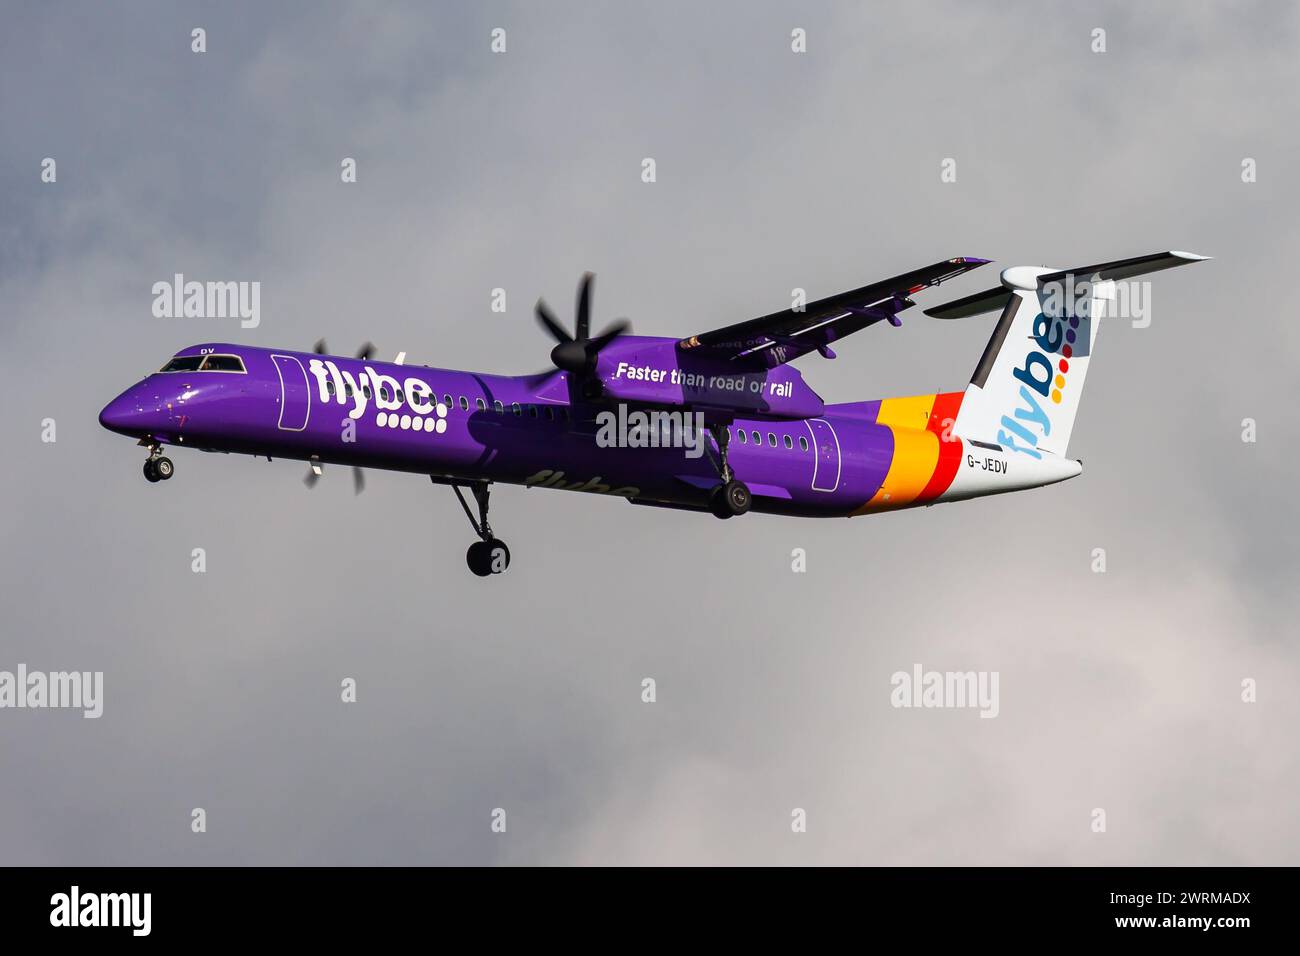 Amsterdam, Netherlands - August 14, 2014: Flybe passenger plane at airport. Schedule flight travel. Aviation and aircraft. Air transport. Global inter Stock Photo